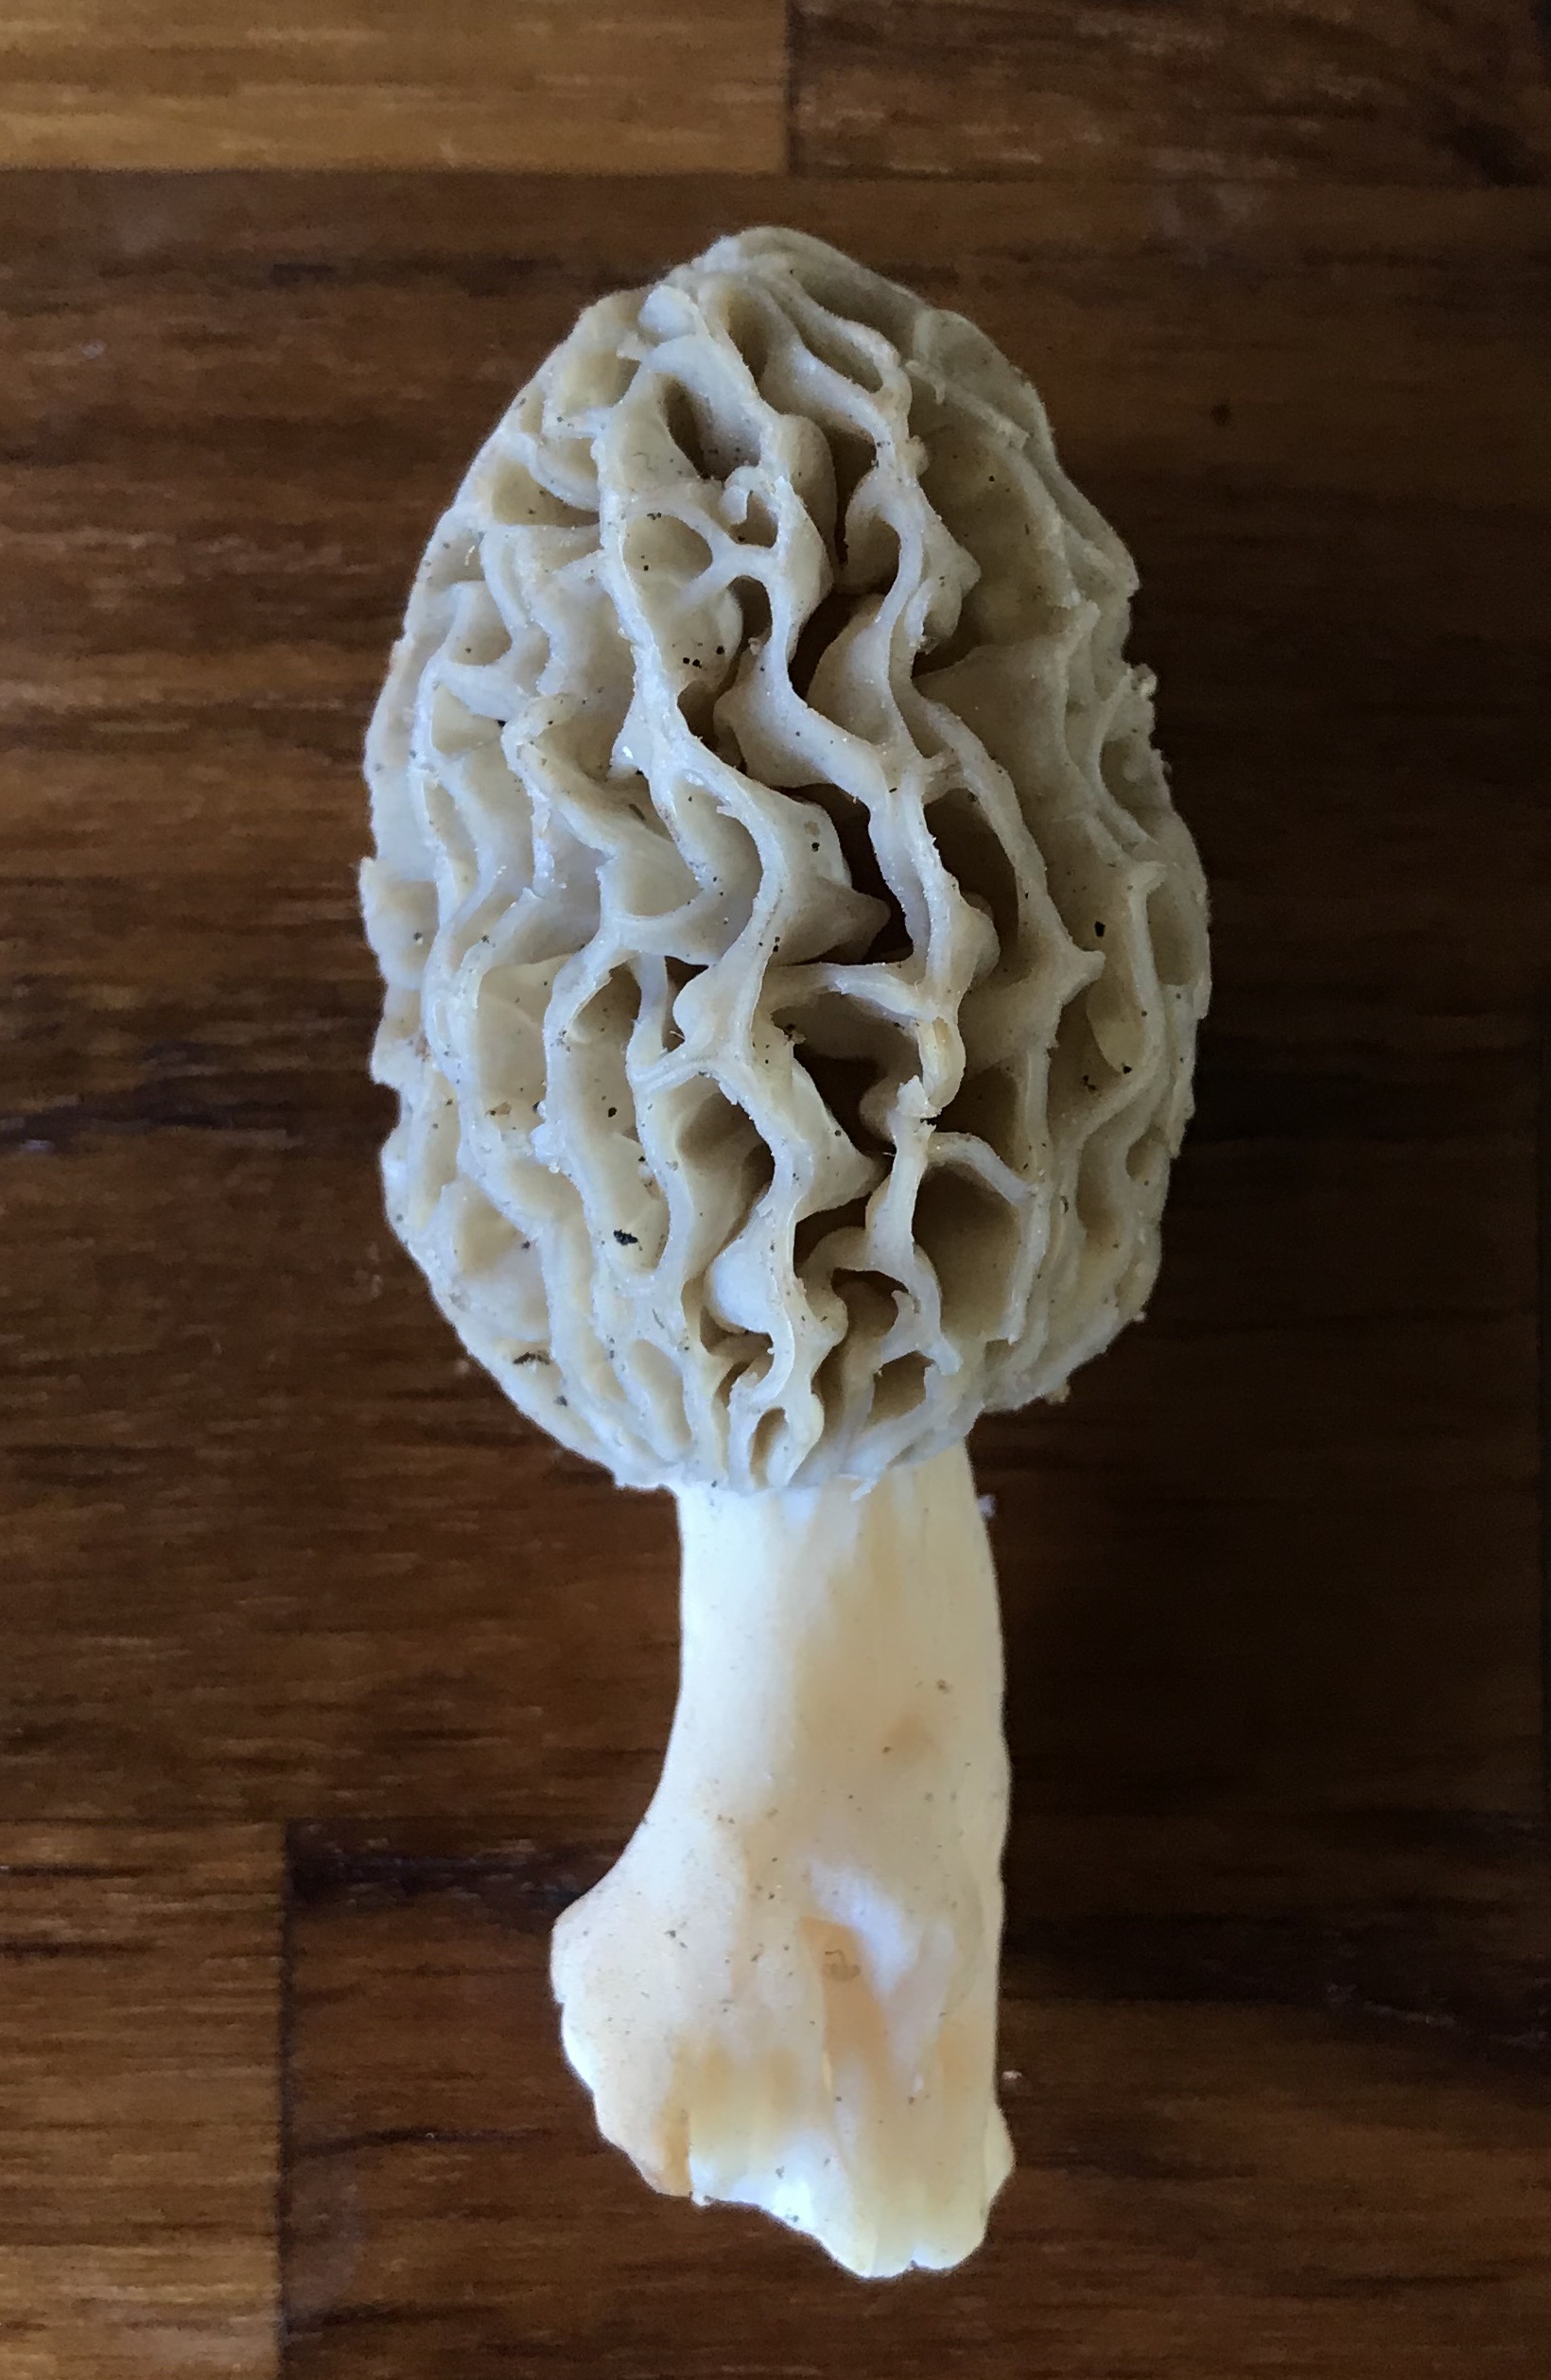 The Maddening Search for Morels